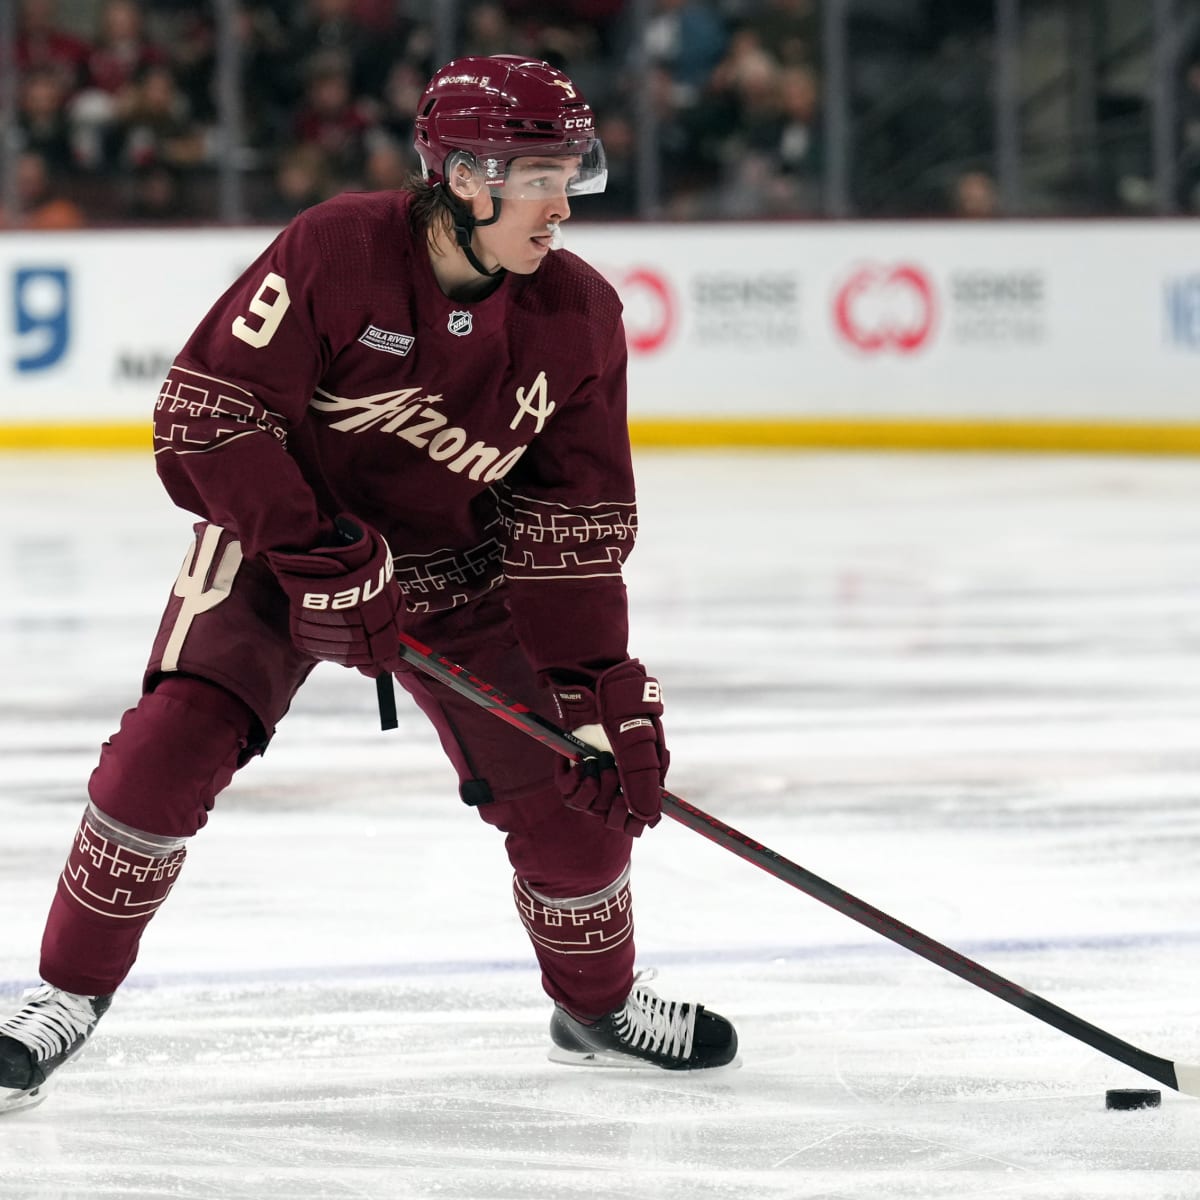 Clayton Keller's agents meet with Coyotes to discuss future